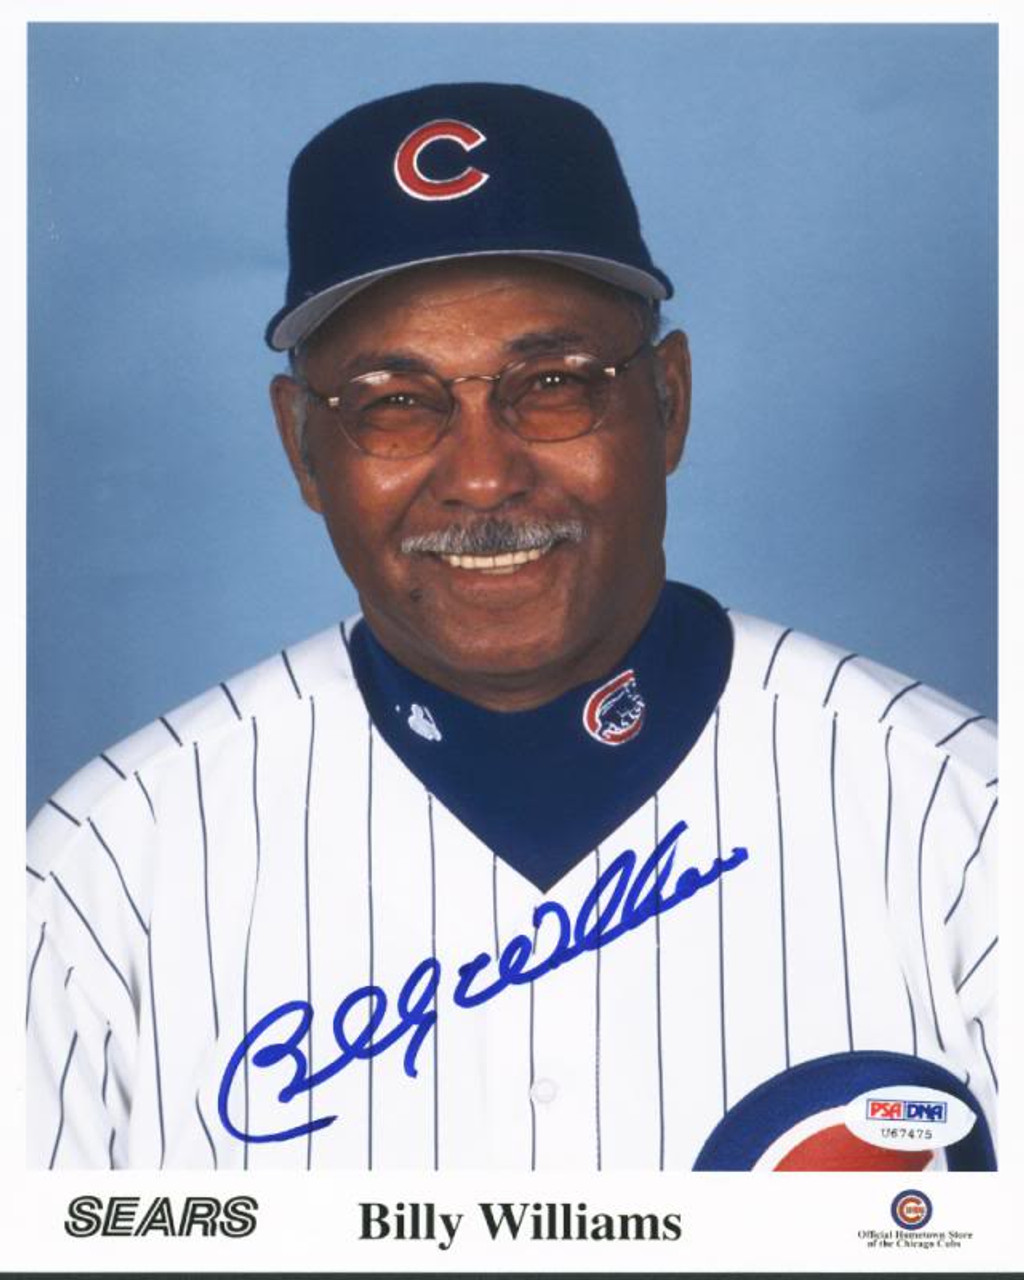 Cubs Billy Williams Signed Authentic 8X10 Photo Autographed PSA